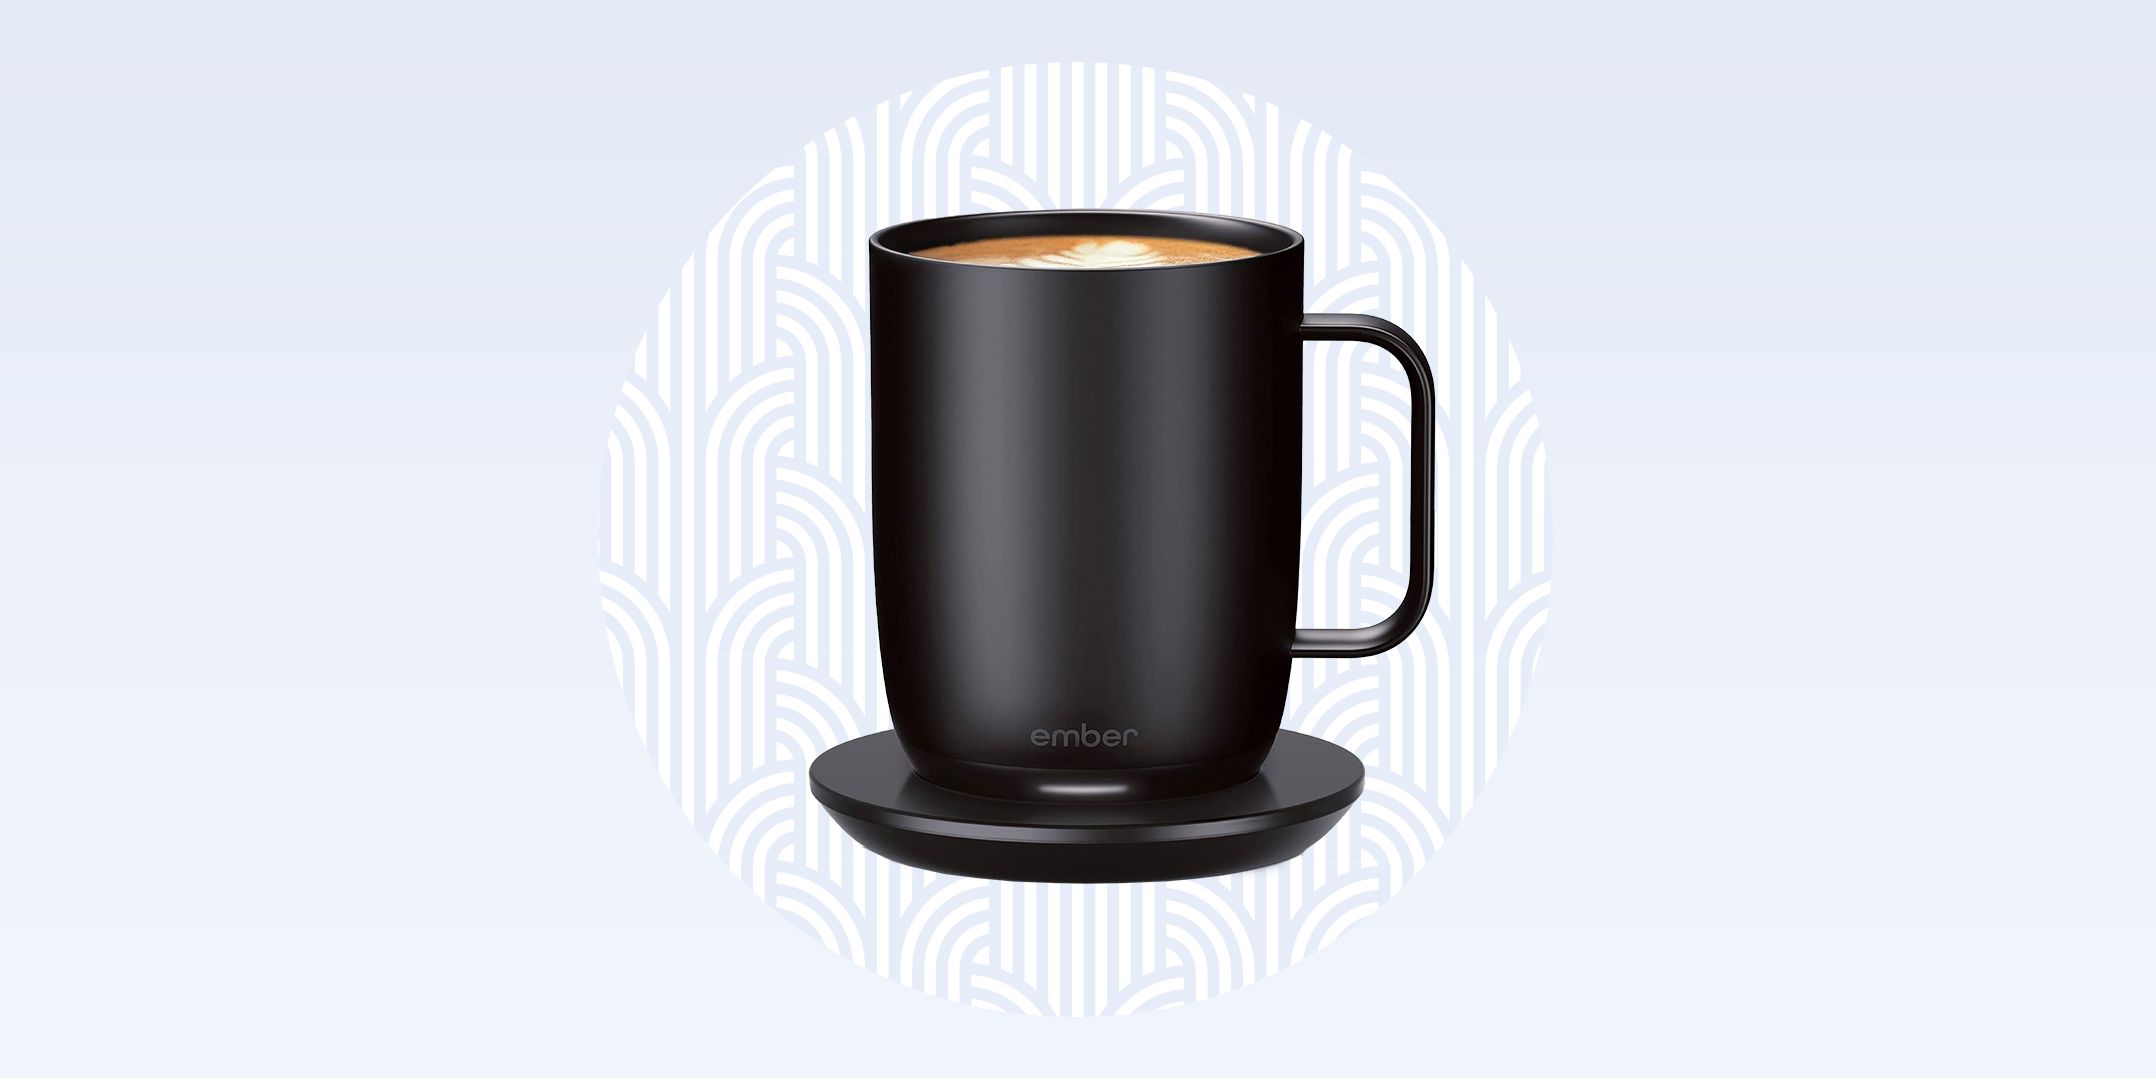 I Tried The Temperature-Control Ember Mug Here's My Thoughts